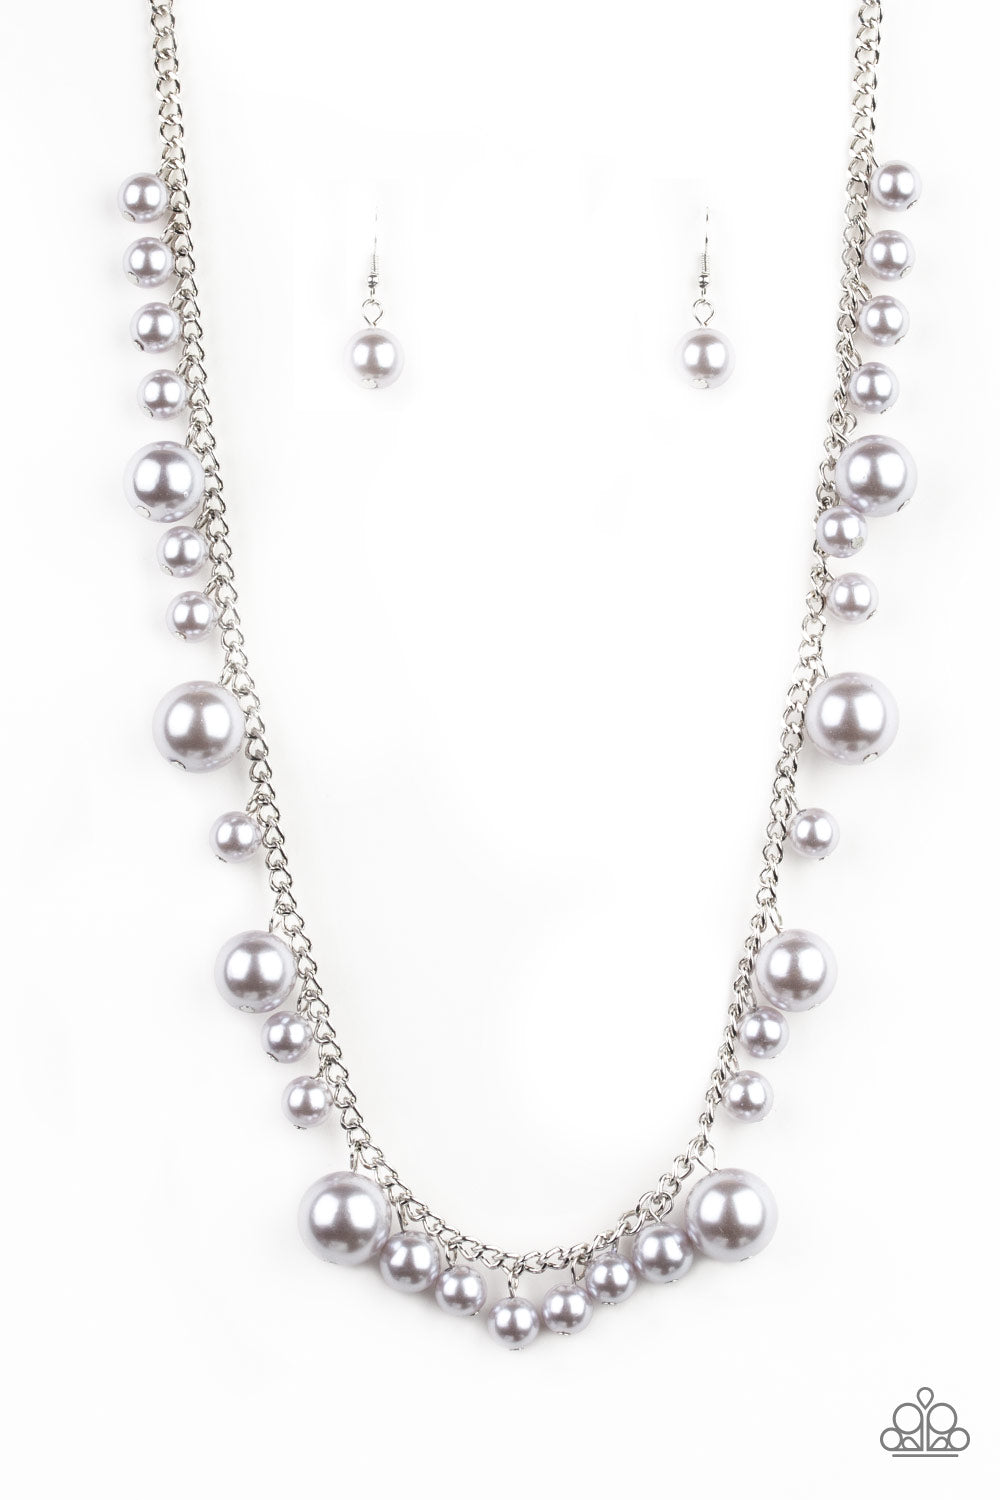 Paparazzi necklace - Theres Always Room At The Top - Silver